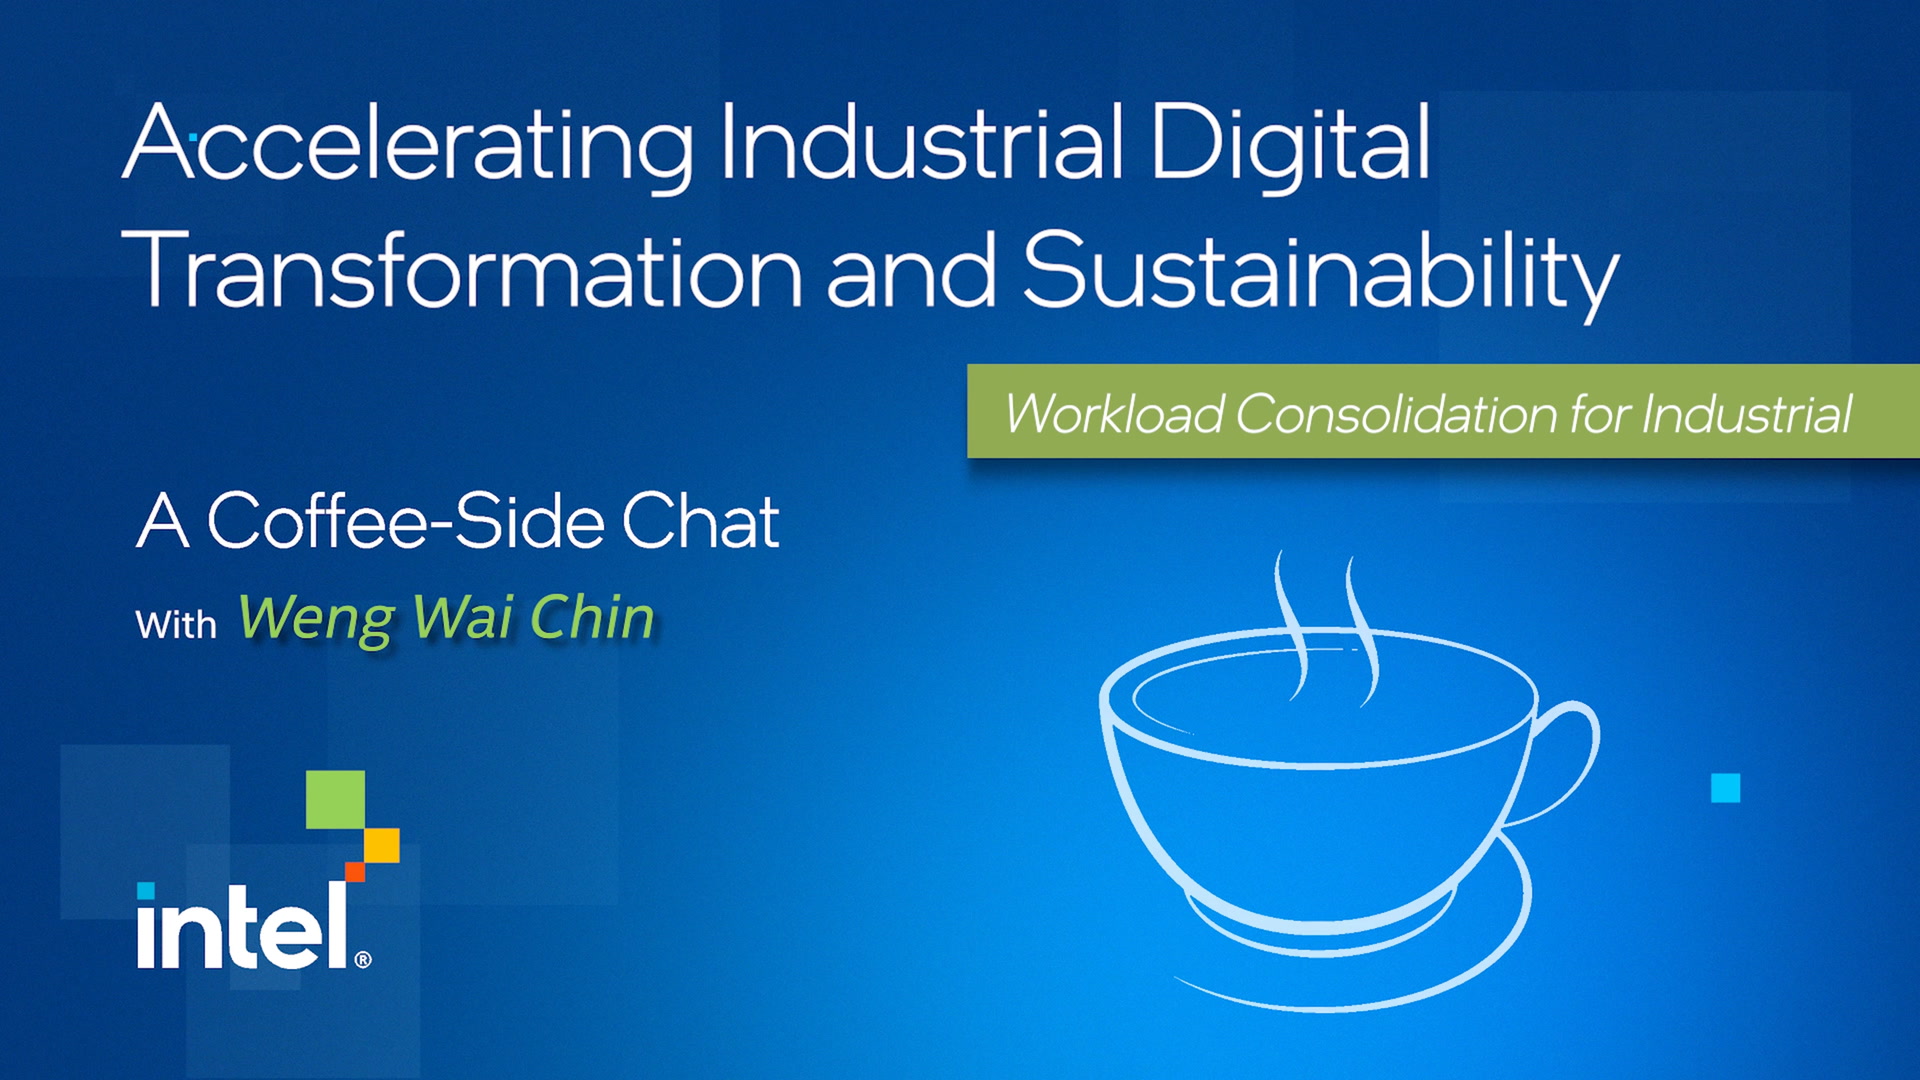 Chapter 1: Accelerating Industrial Digital Transformation and Sustainability